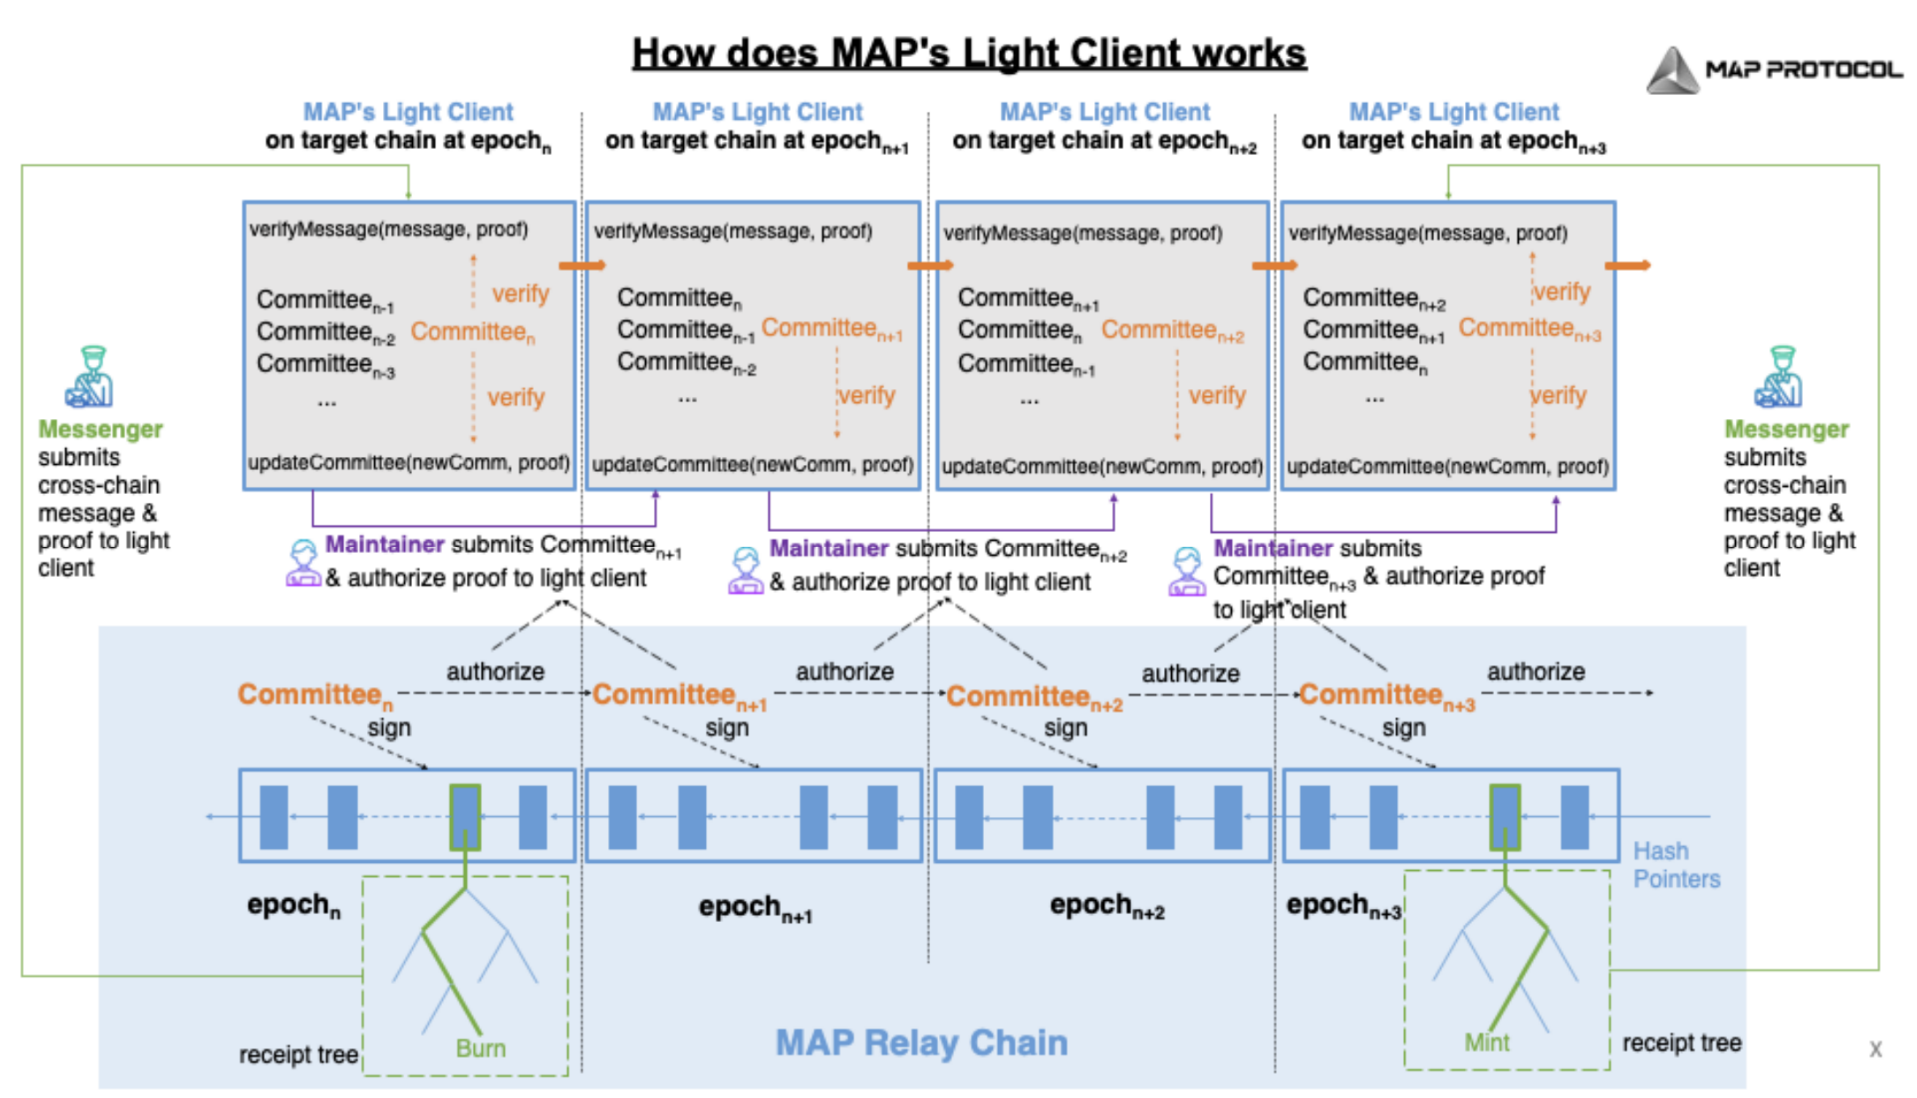 Light client cross-chain mechanism on MAP Protocol